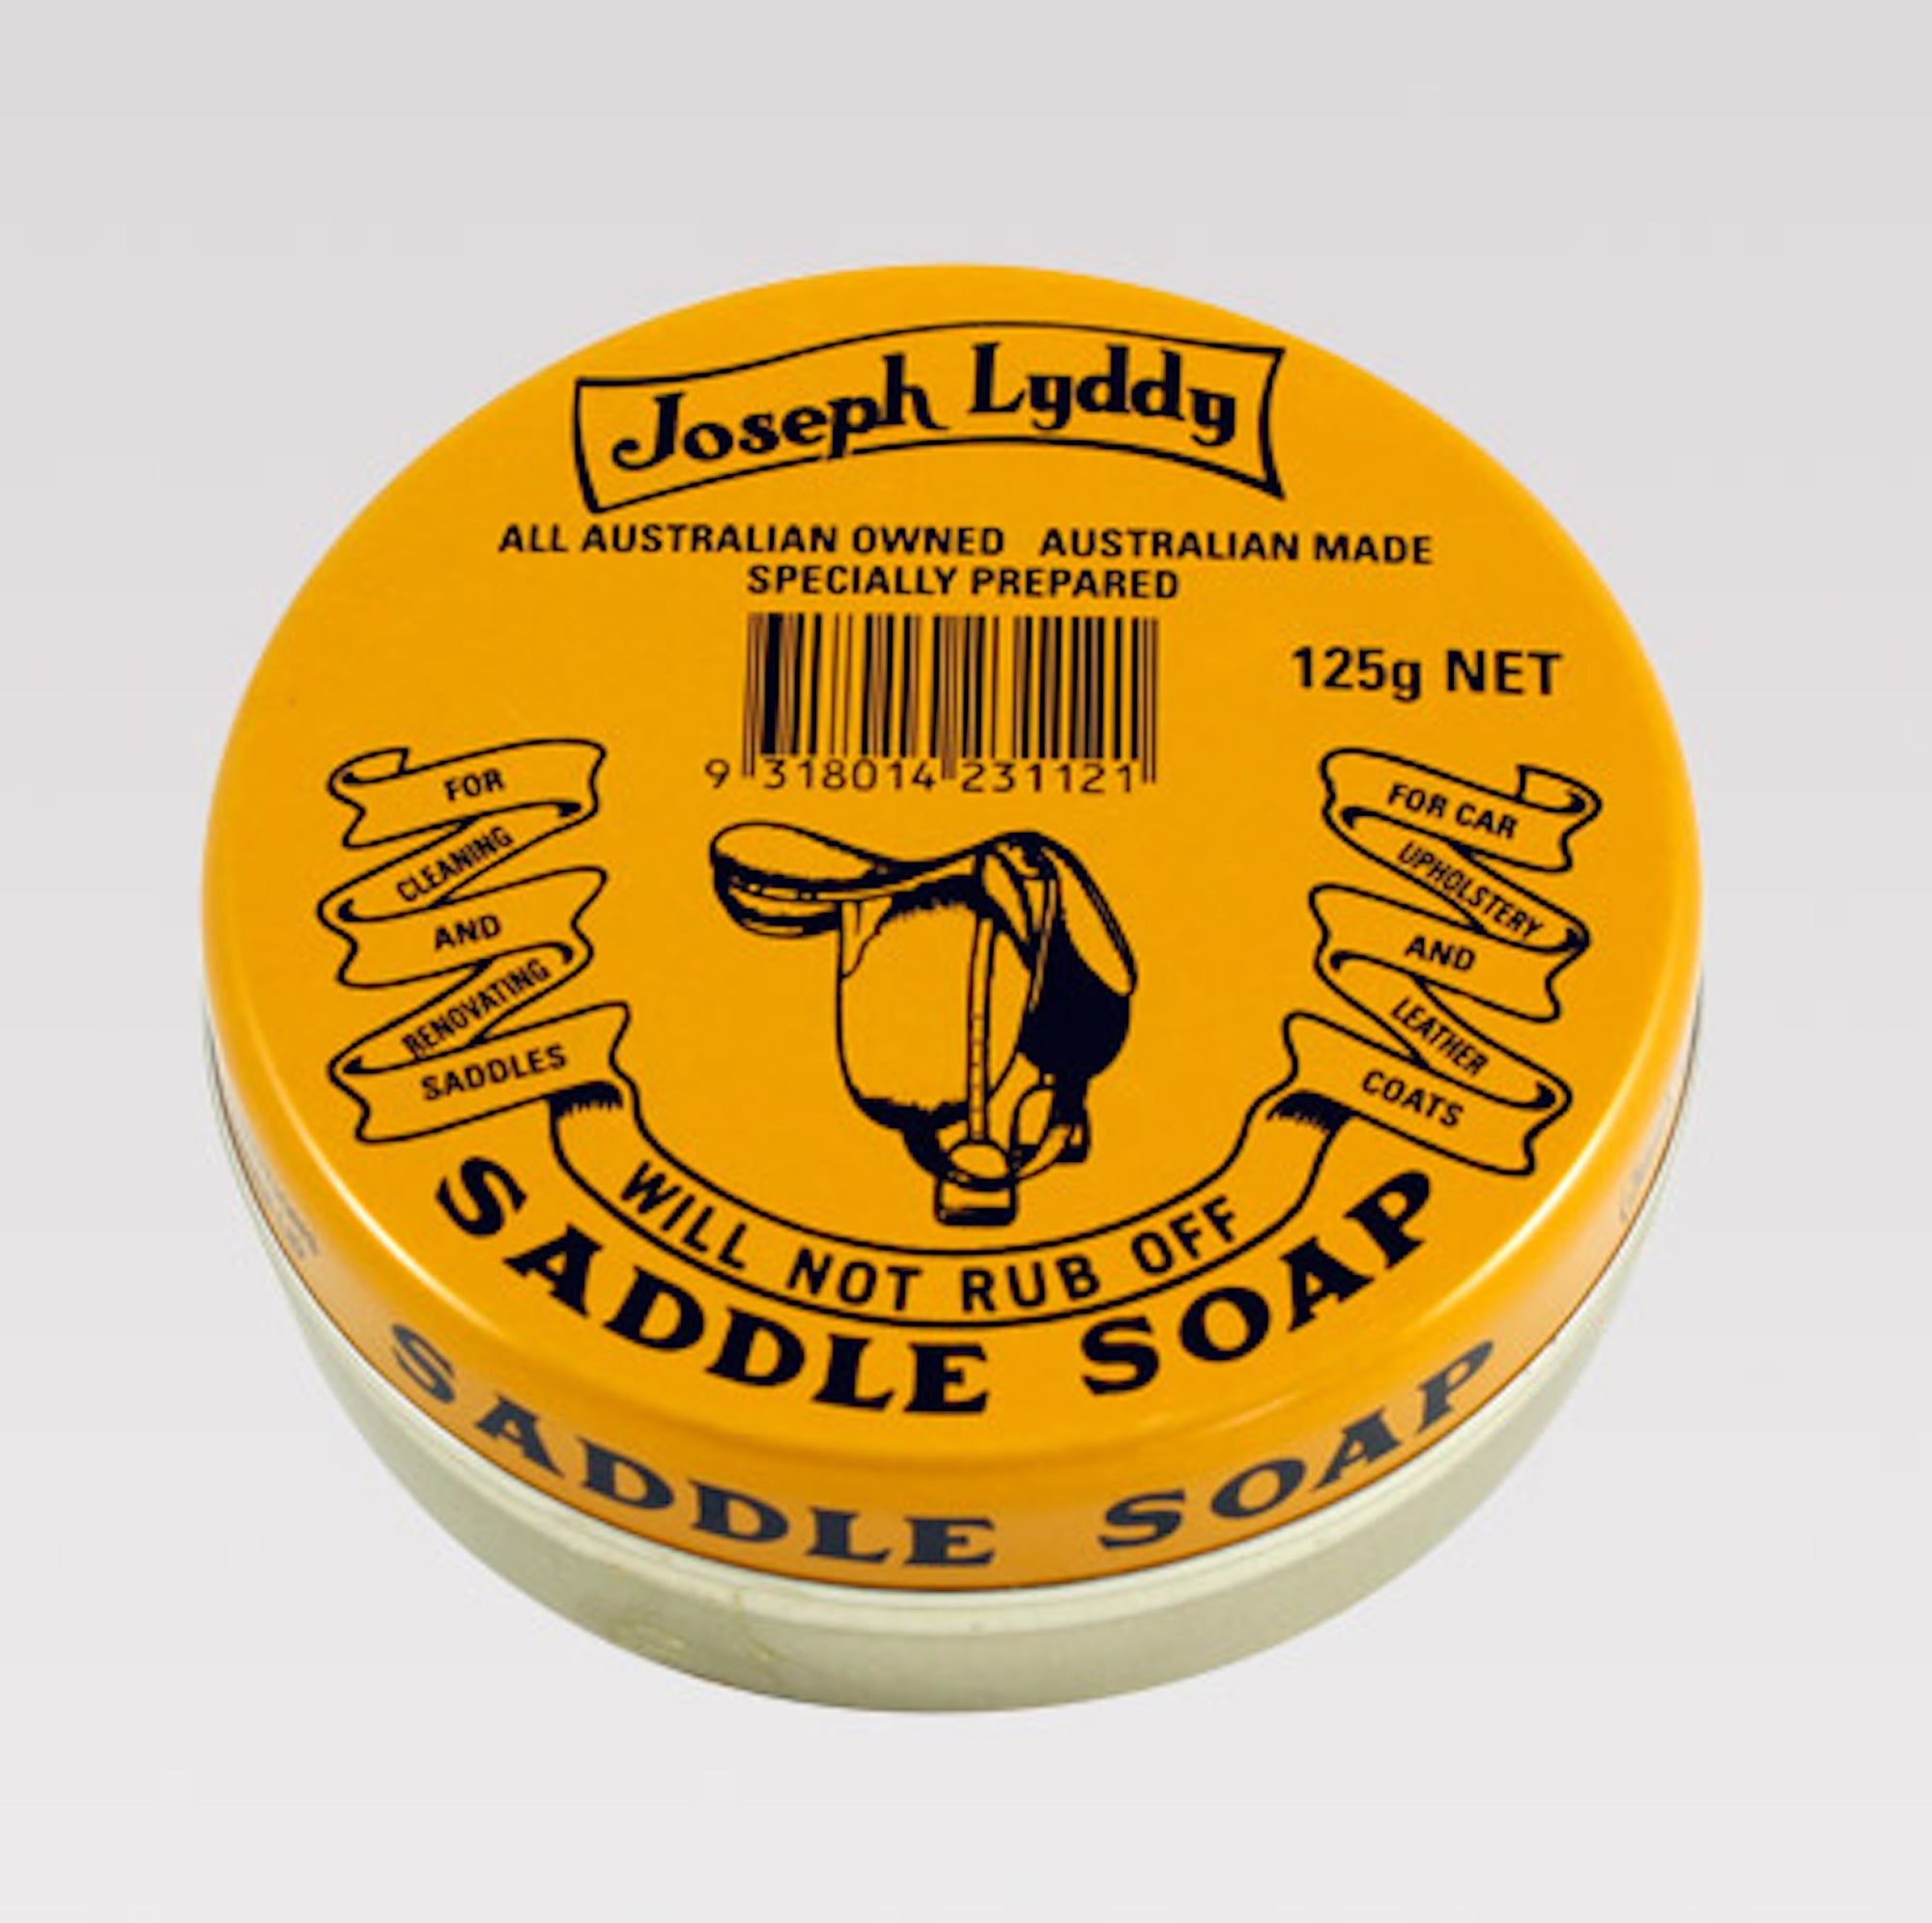 Cylindrical tin of saddle soap with yellow lid and black text.